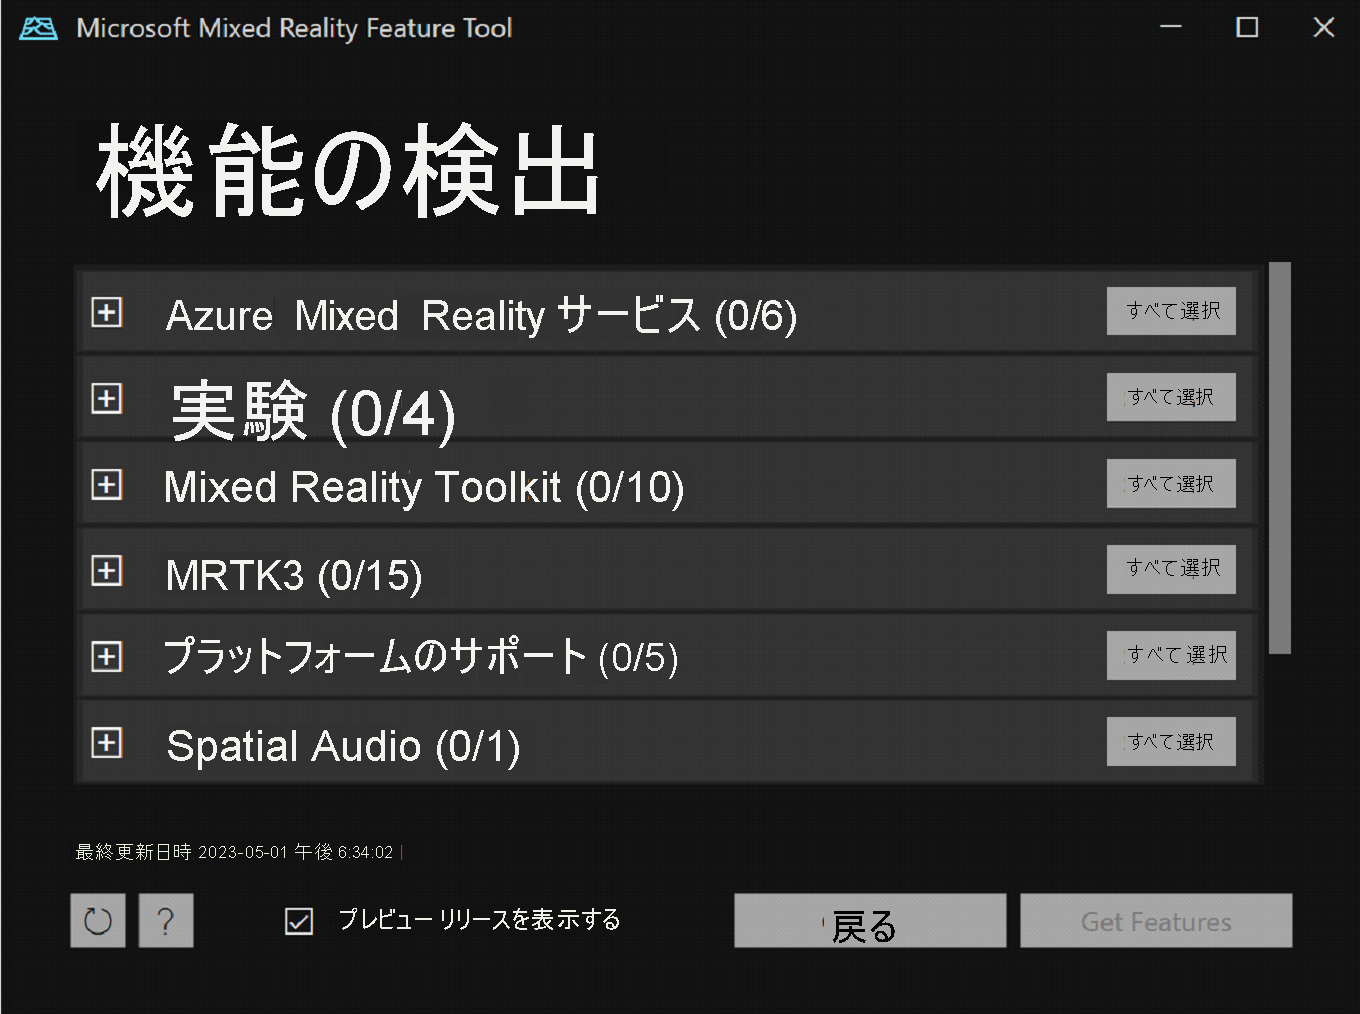 The main groups of packages in the Mixed Reality Feature Tool